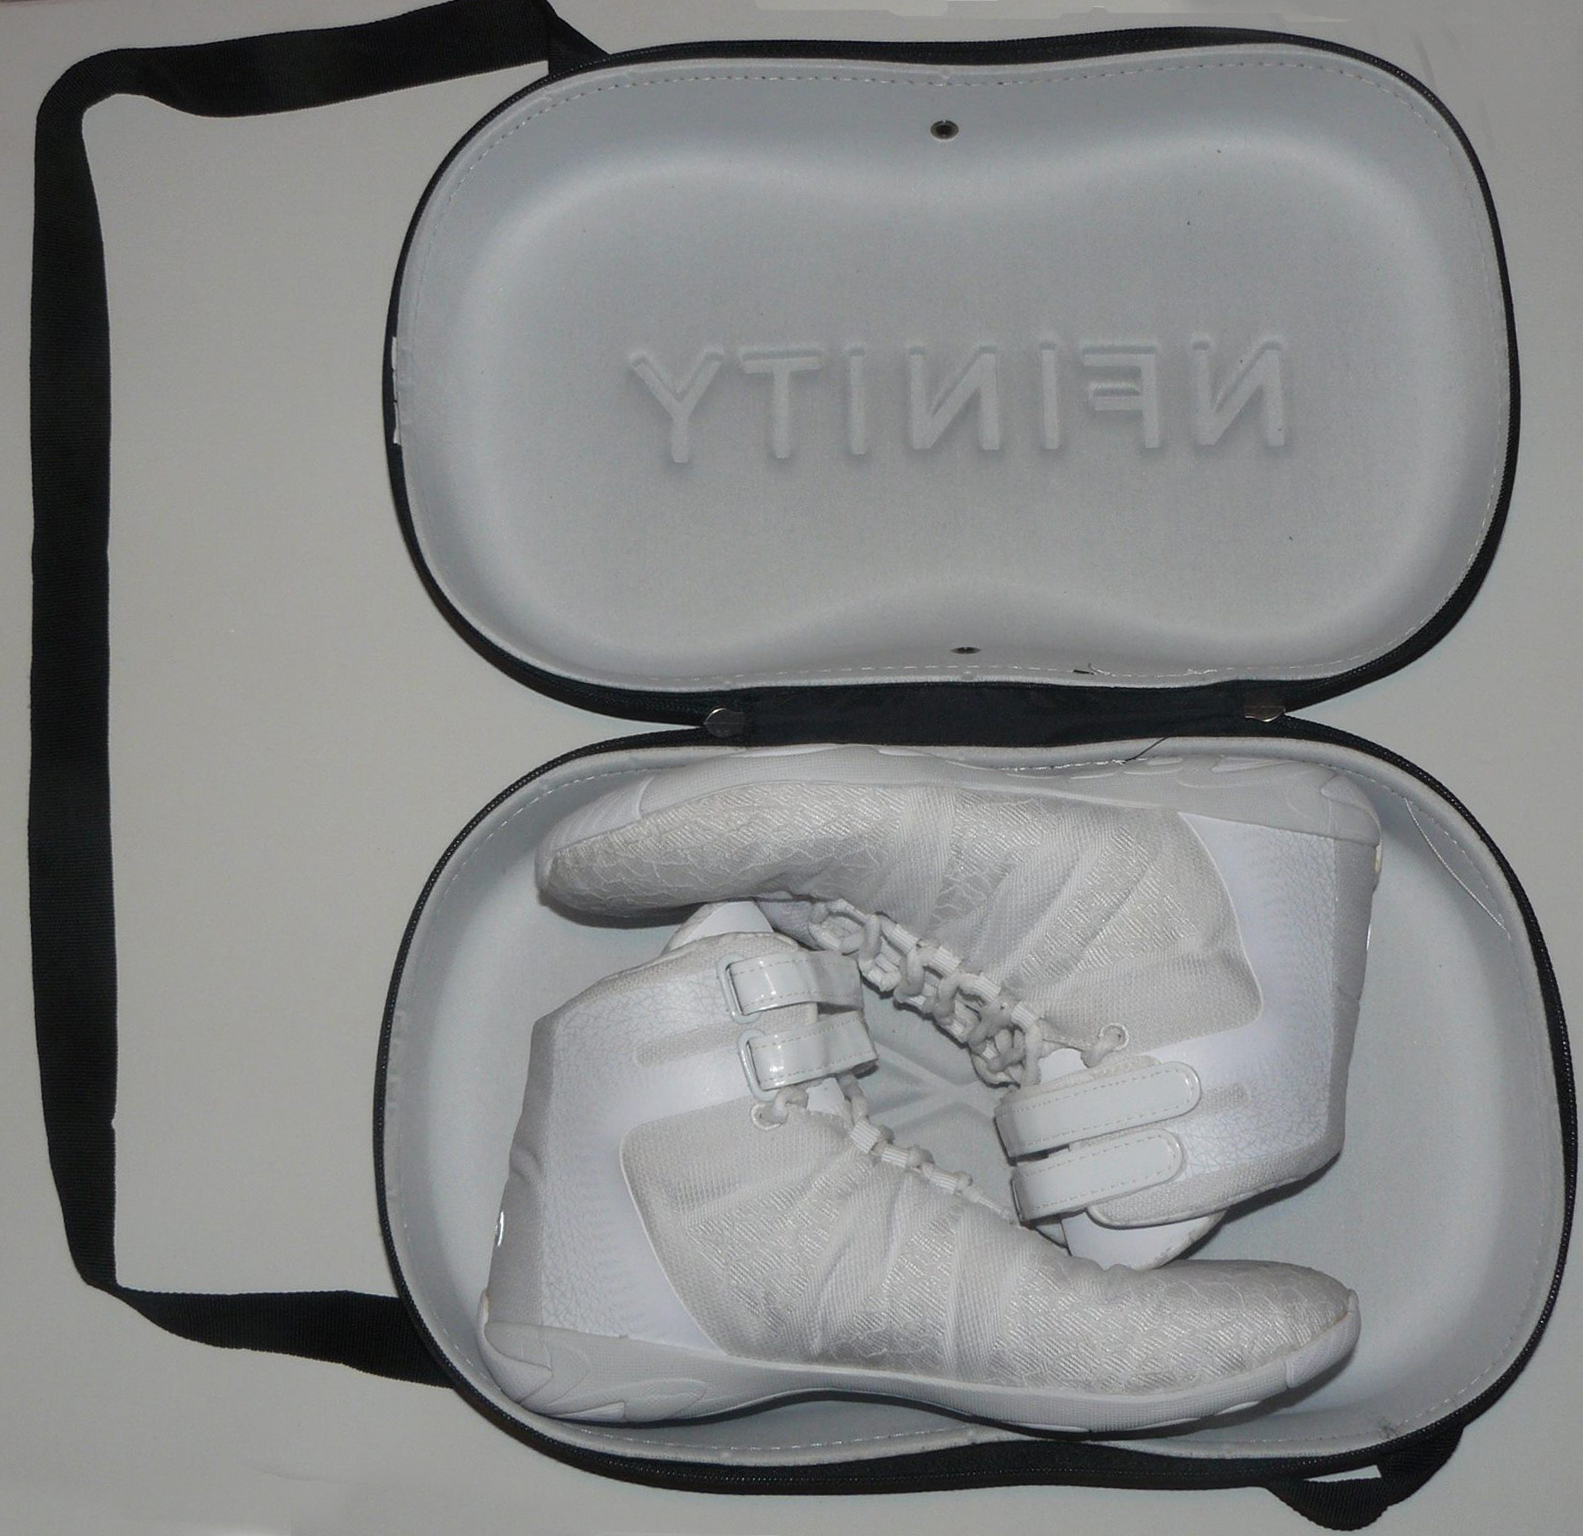 Nfinity Titan review – The UK's number 